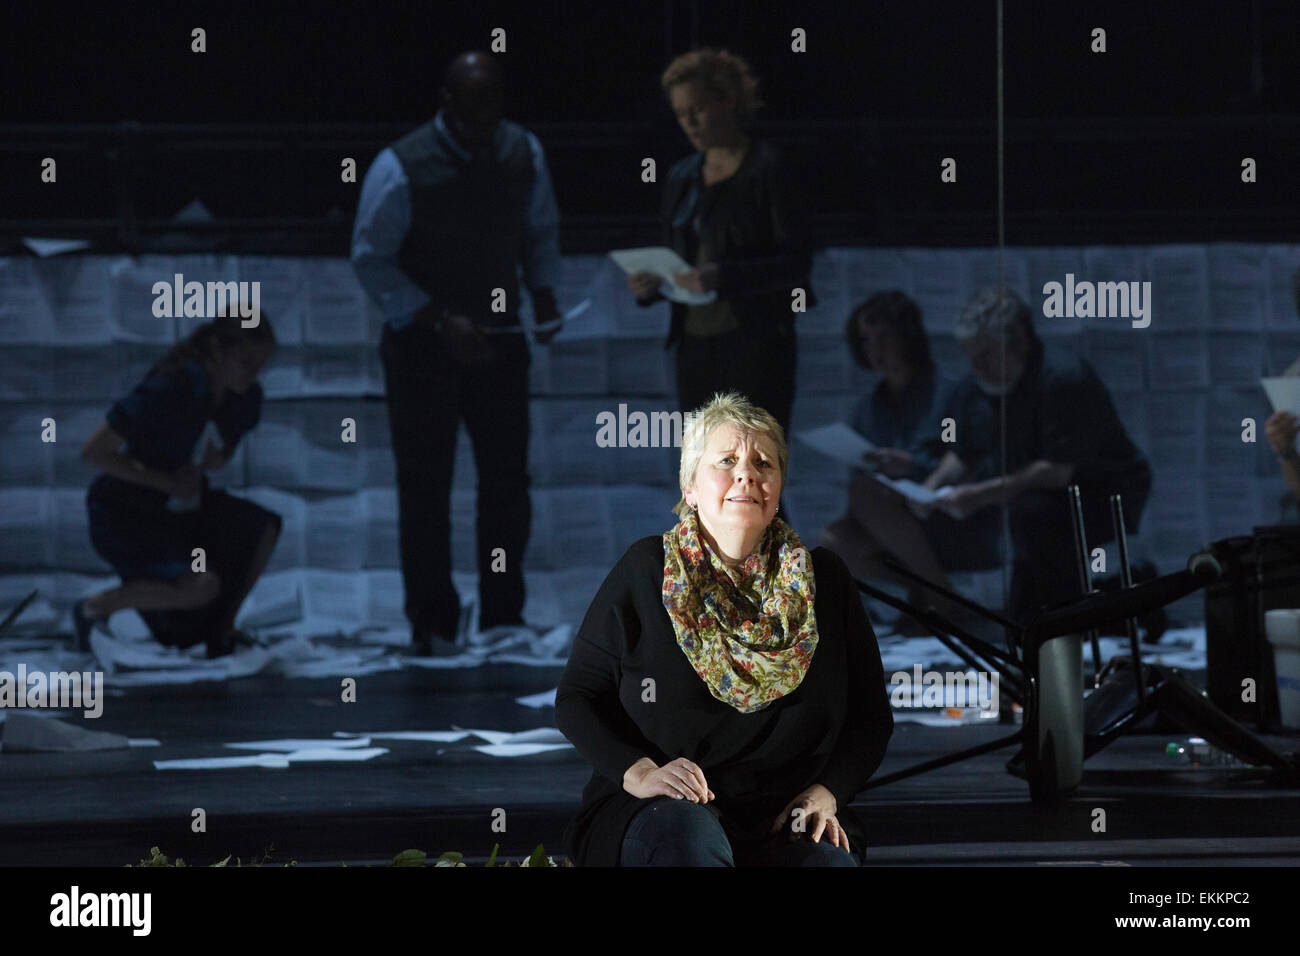 Susan Bickley as Mother. Deborah Warner directs the world premiere of Tansy Davies's first opera 'Between Worlds' inspired by the terrorist attacks on the World Trade Center in New York City on 9/11 at the Barbican Theatre, London, United Kingdom. The opera conducted by Gerry Cornelius will run for 8 performances a the Barbican from 11 April 2015. An English National Opera production. With Andrew Watts as Shaman, Eric Greene as Janitor, Rhian Lois as Younger Woman, Clare Presland as Realtor, William Morgan as Younger Man, Phillip Thodes as Older Man, Susan Bickley as Mother, Philipp Sheffield  Stock Photo